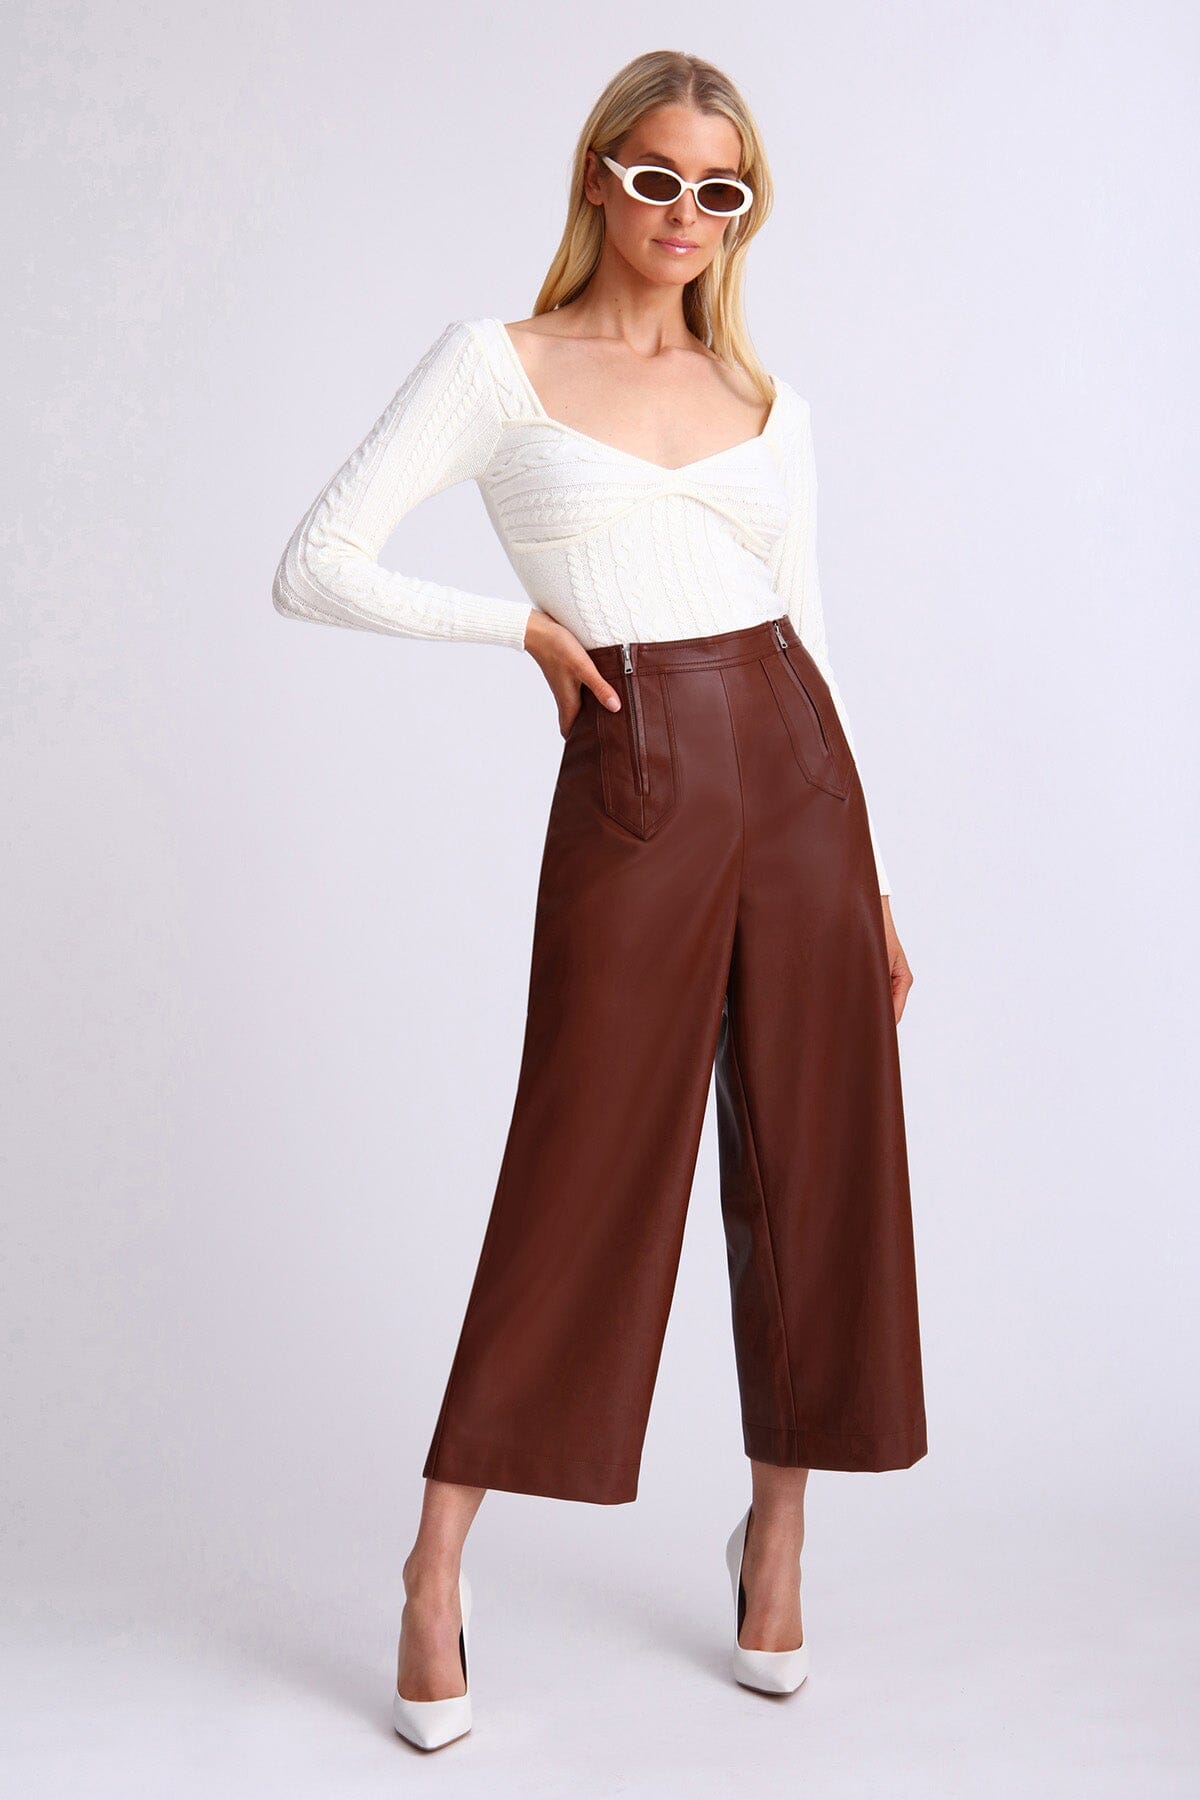 Brown double zip faux leather cropped culotte pant - figure flattering office to date night pants for ladies by avec les filles